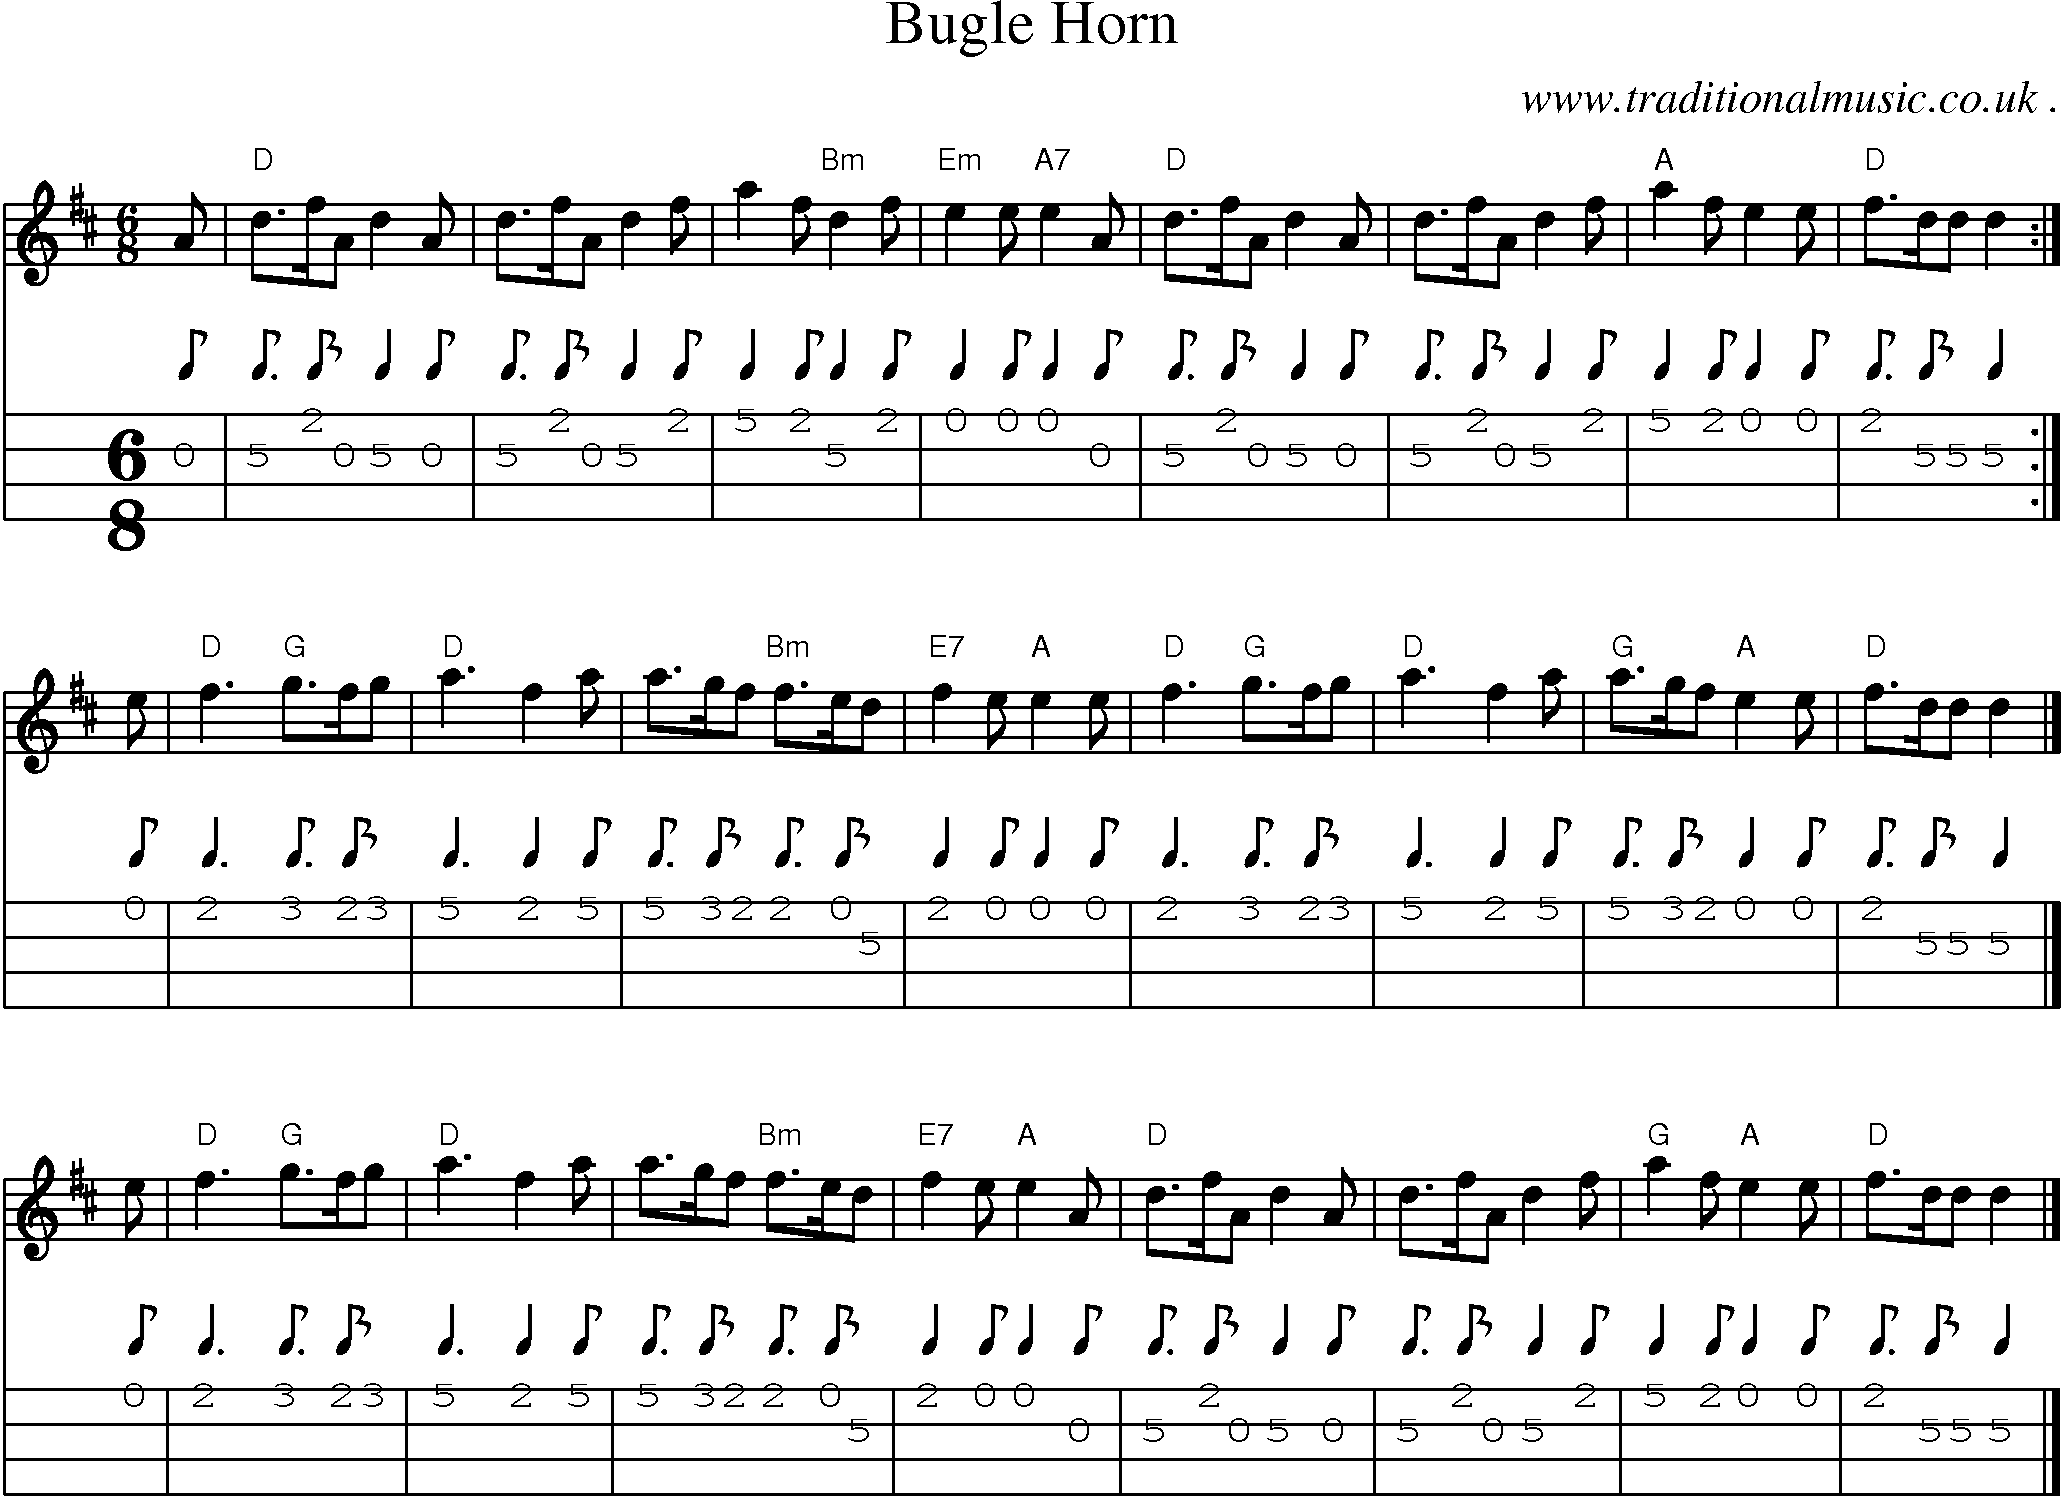 Sheet-music  score, Chords and Mandolin Tabs for Bugle Horn